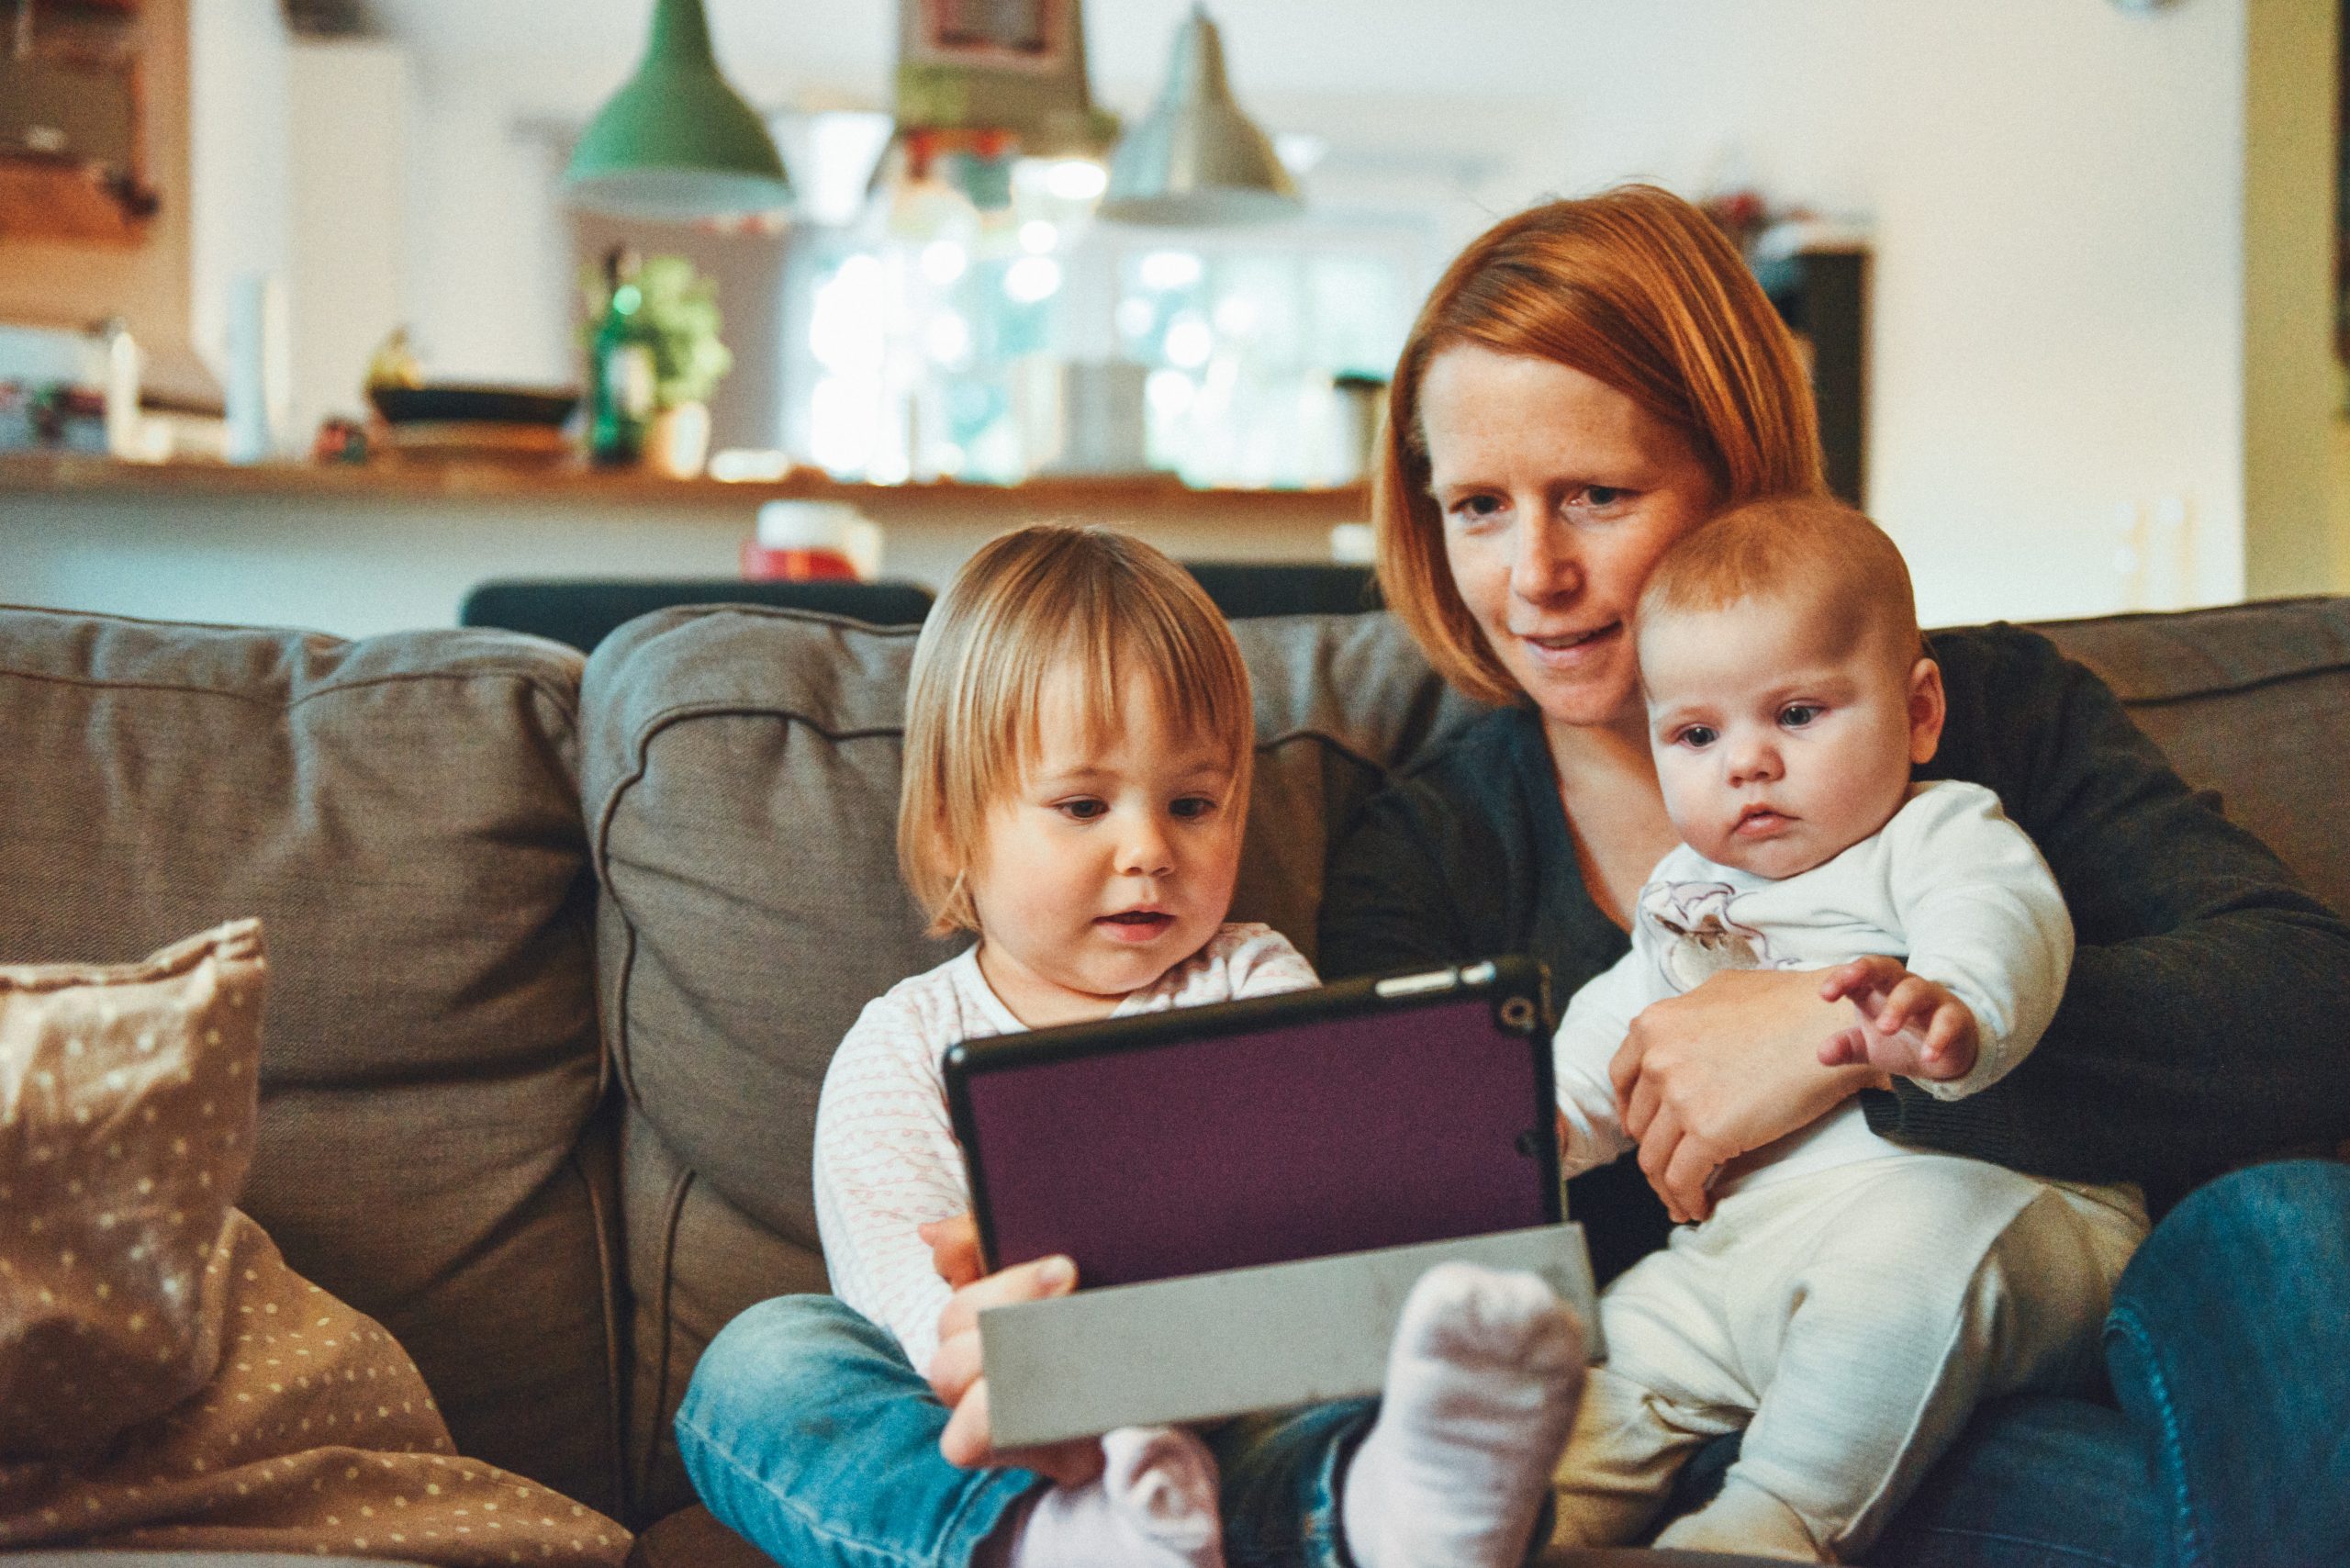 A young white mum cradles a toddler and a baby in her lap. She sits on a sofa with a tablet in her hands in front of the children.